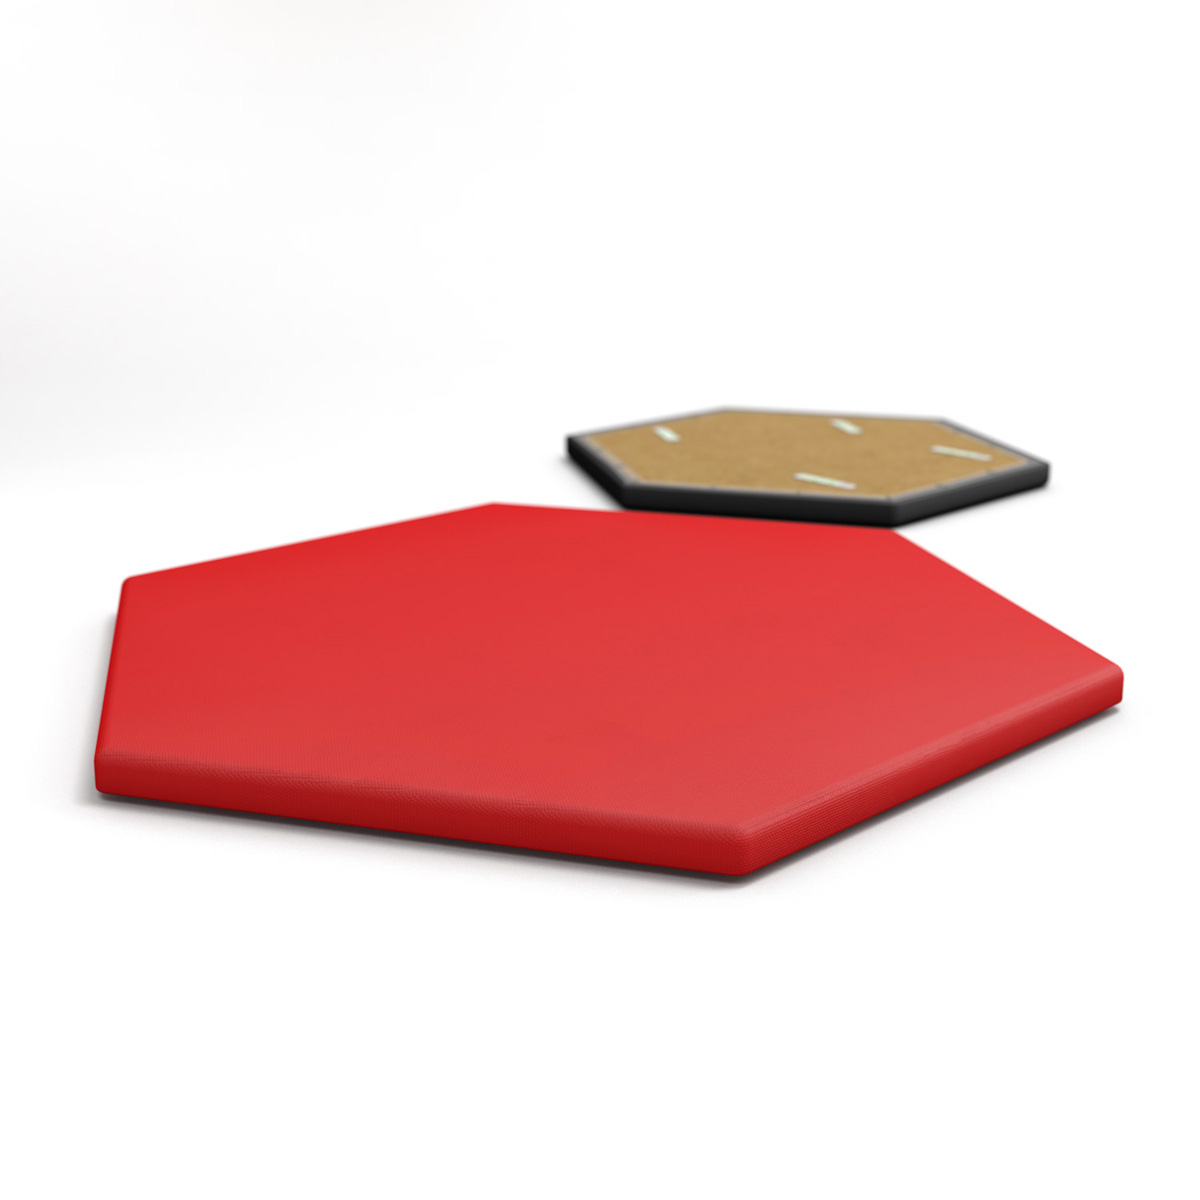 ZAGATO™ Hexagonal Acoustic Wallboards Are Available As Full And Half Hexagon 